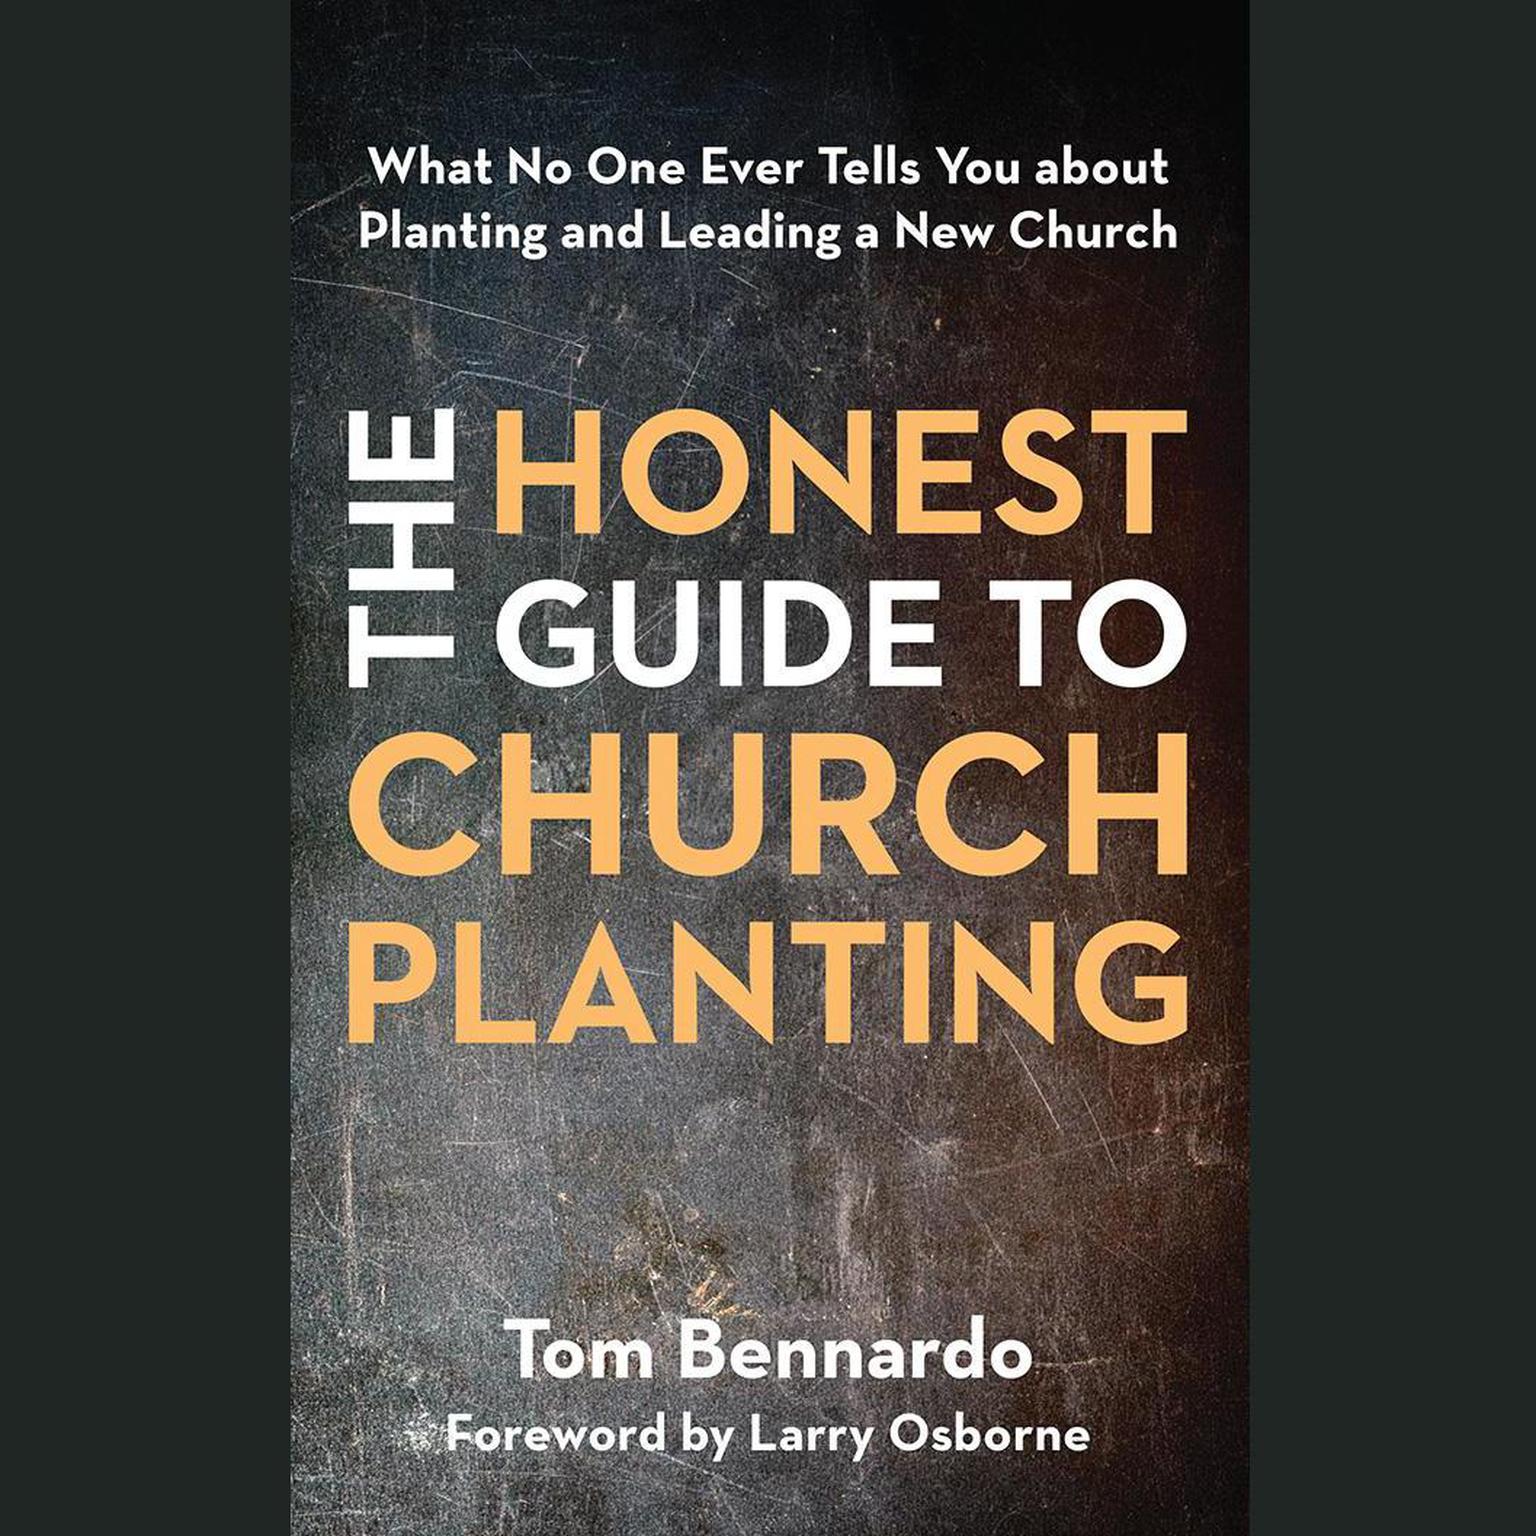 The Honest Guide to Church Planting: What No One Ever Tells You about Planting and Leading a New Church Audiobook, by Tom Bennardo